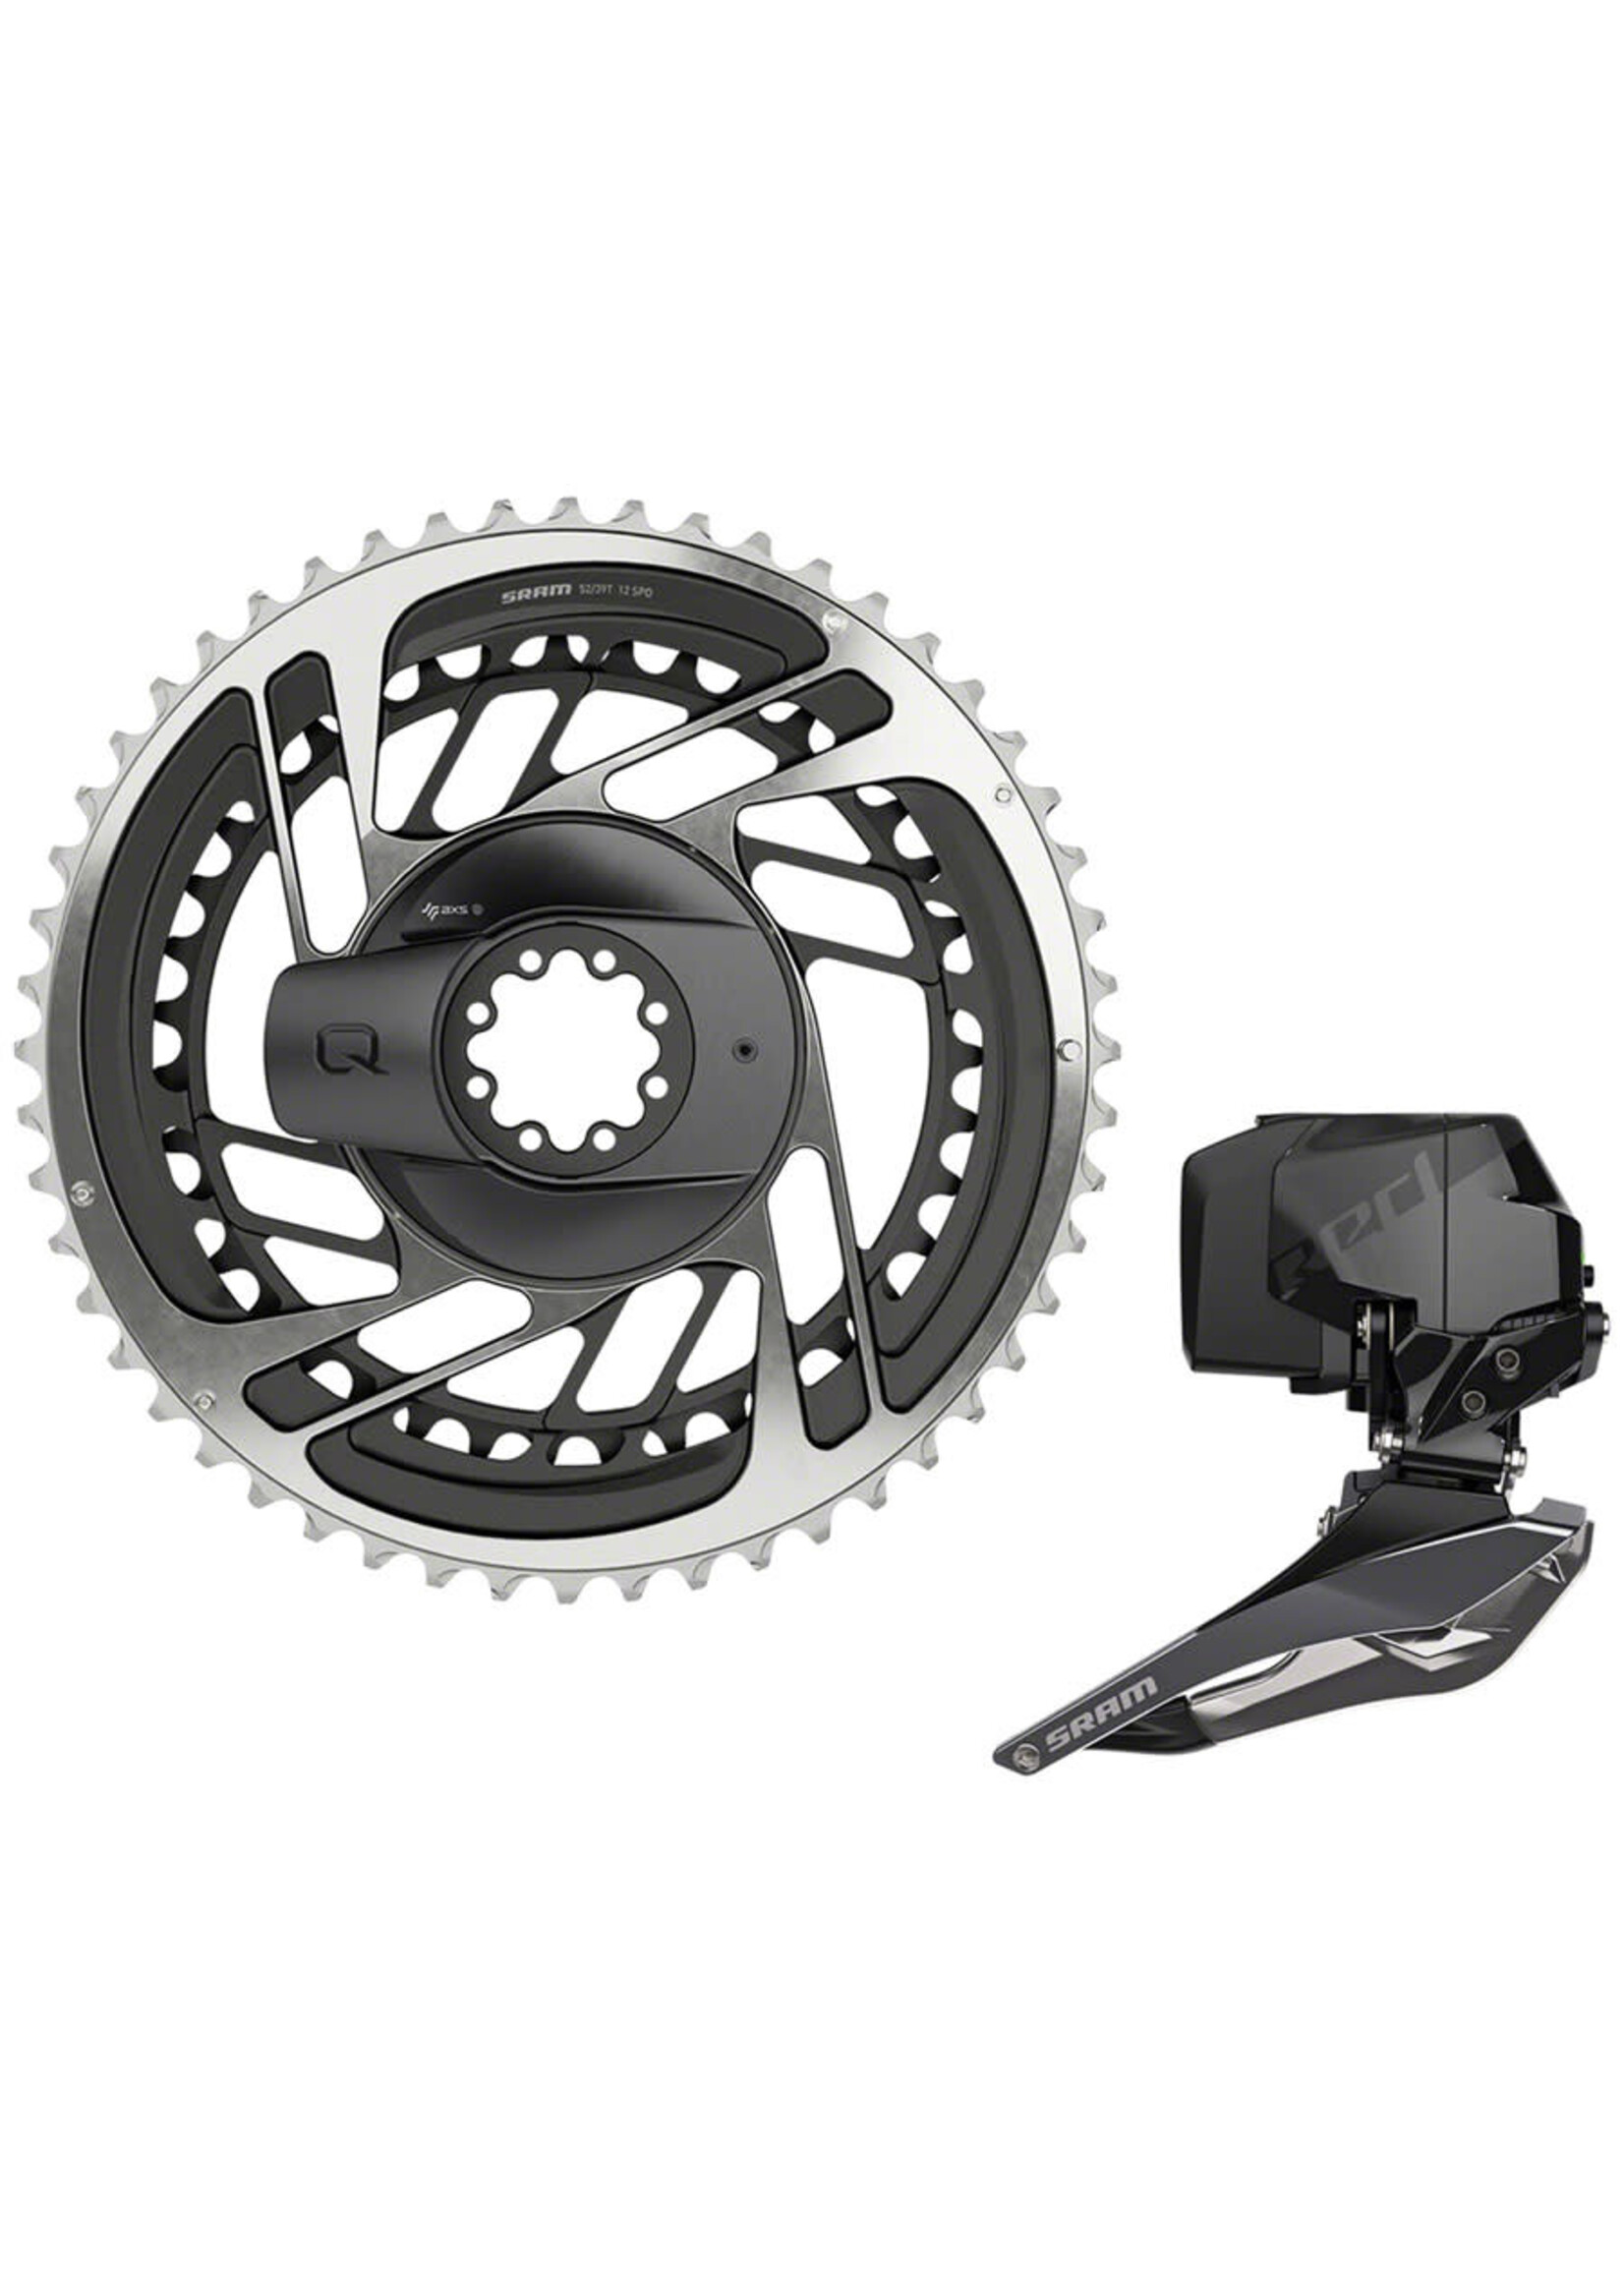 SRAM Power Meter KIT DM5239T RED AXS D1 GREY (Includes Power Meter w Integrated Chainrings, Red AXS 2-Position Front Derailleur)